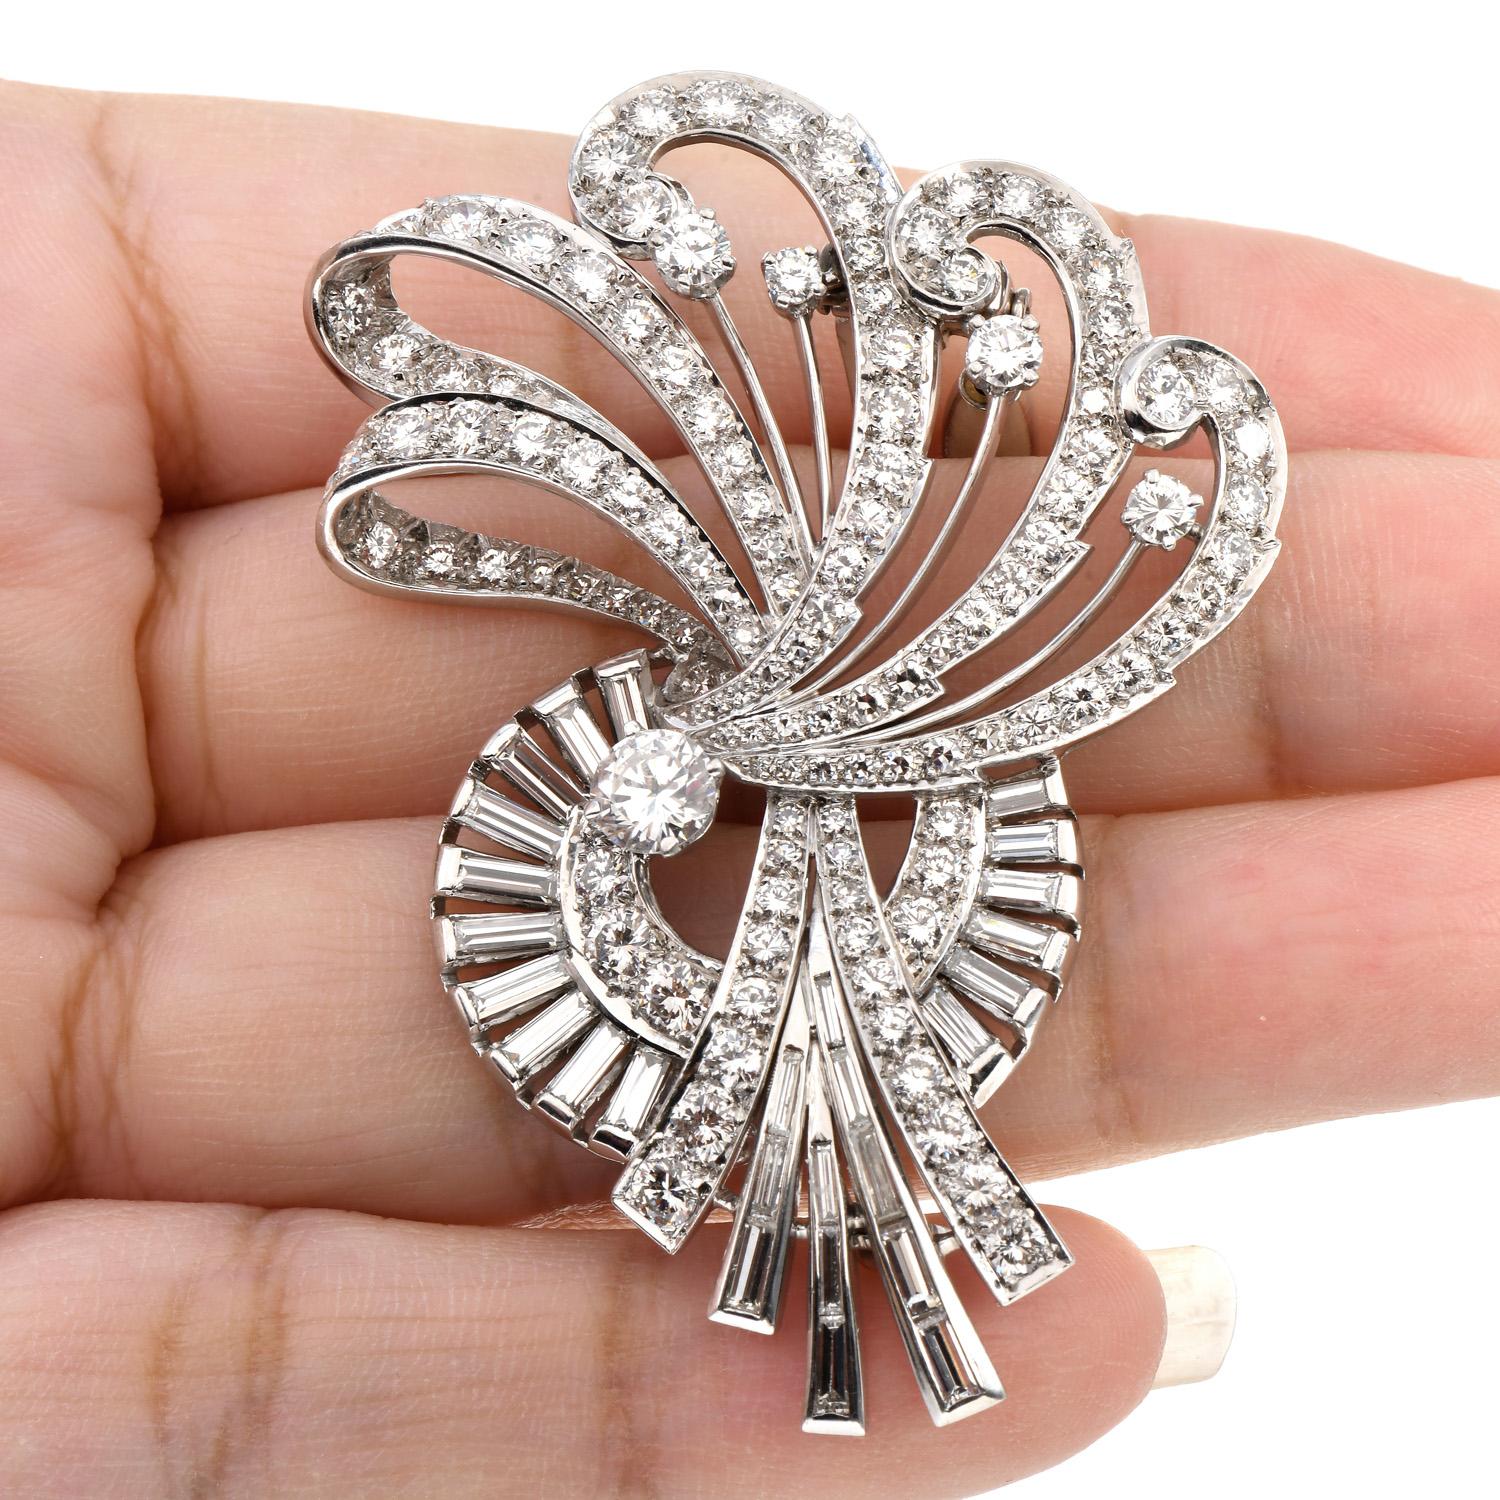 This fabulous vintage diamond Brooch Pin was inspired by a floral motif with winged movement and a beautiful flow, crafted in Luxurious Platinum.

Features a center Round Cut Genuine Diamond of 0.75 carats, G-H, VS1, and it is adorned by 119 Round